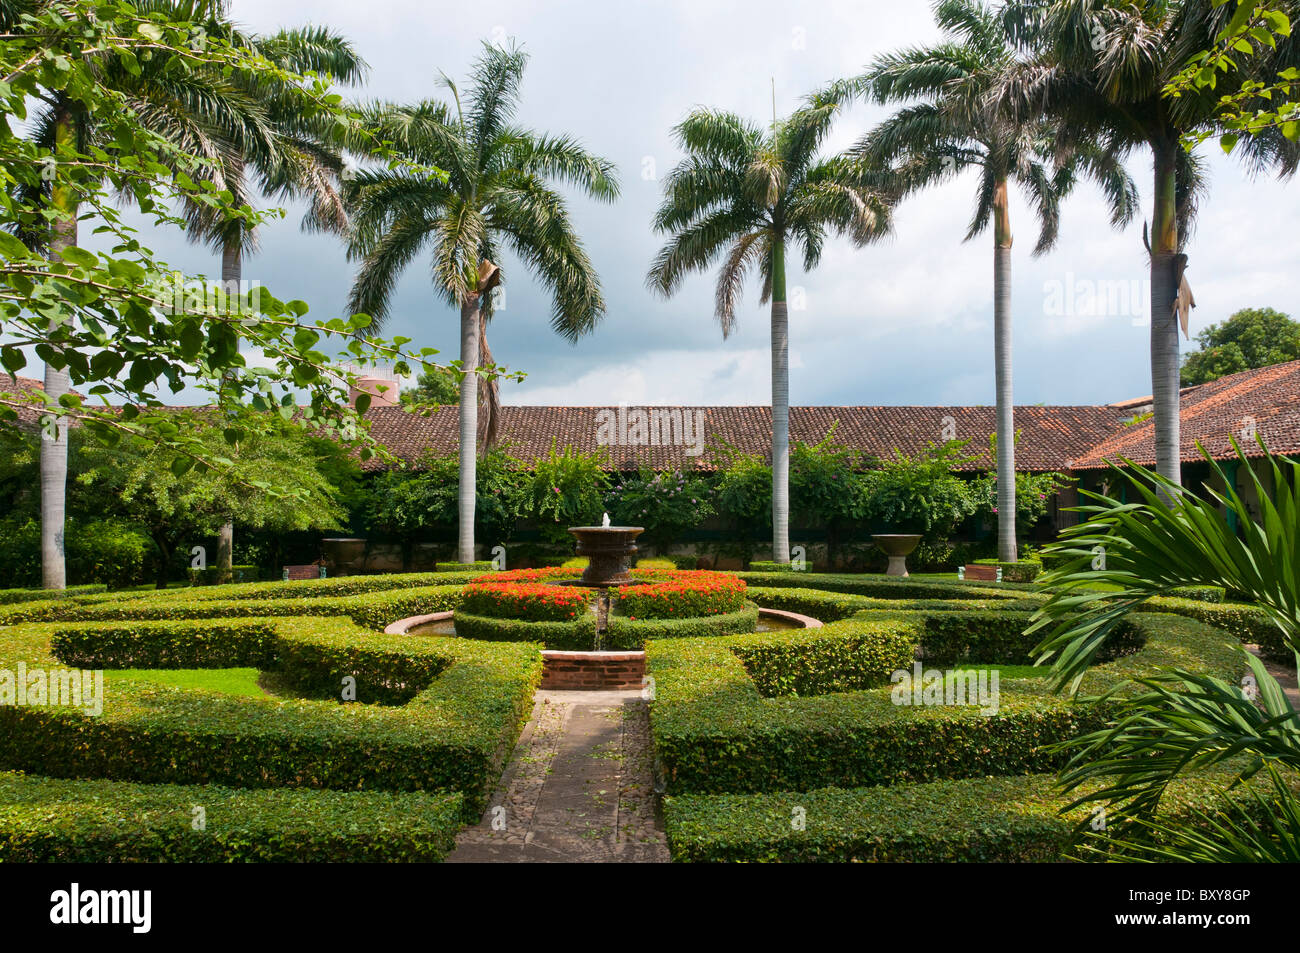 Courtyard of the historical Hotel El Convento Leon Nicaragua Stock Photo